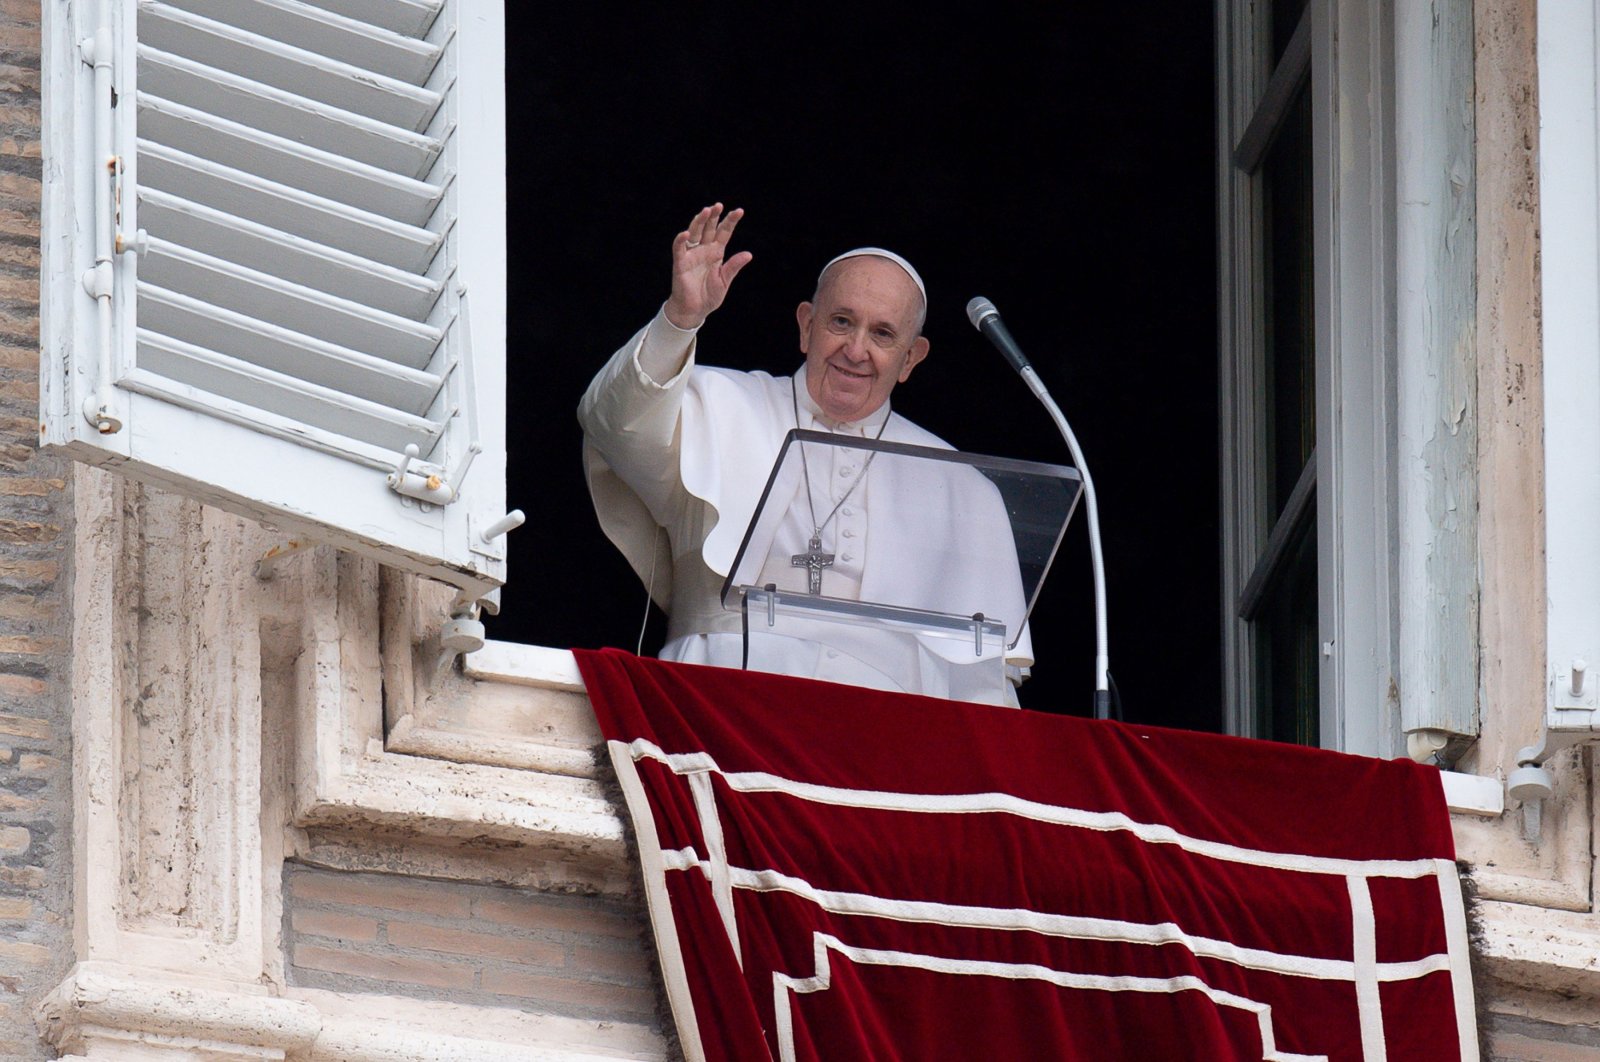 Pope Francis waves from the window of the apostolic palace overlooking St. Peter's Square during the weekly Angelus prayer in the Vatican, during the COVID-19 pandemic, Feb. 7, 2021. (AFP)